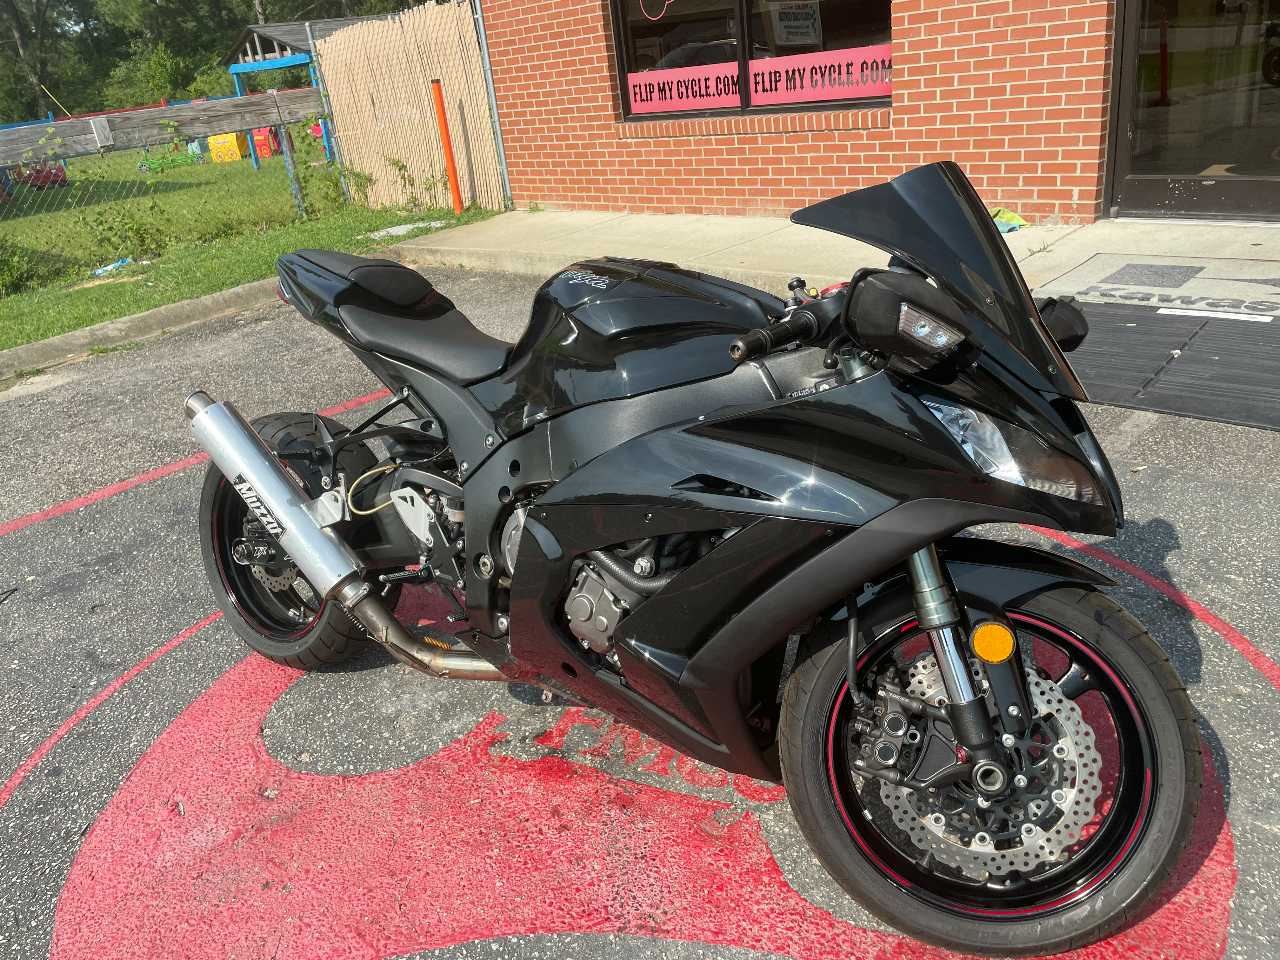 Why Buy a Used Sports Bike in the Holiday Season?